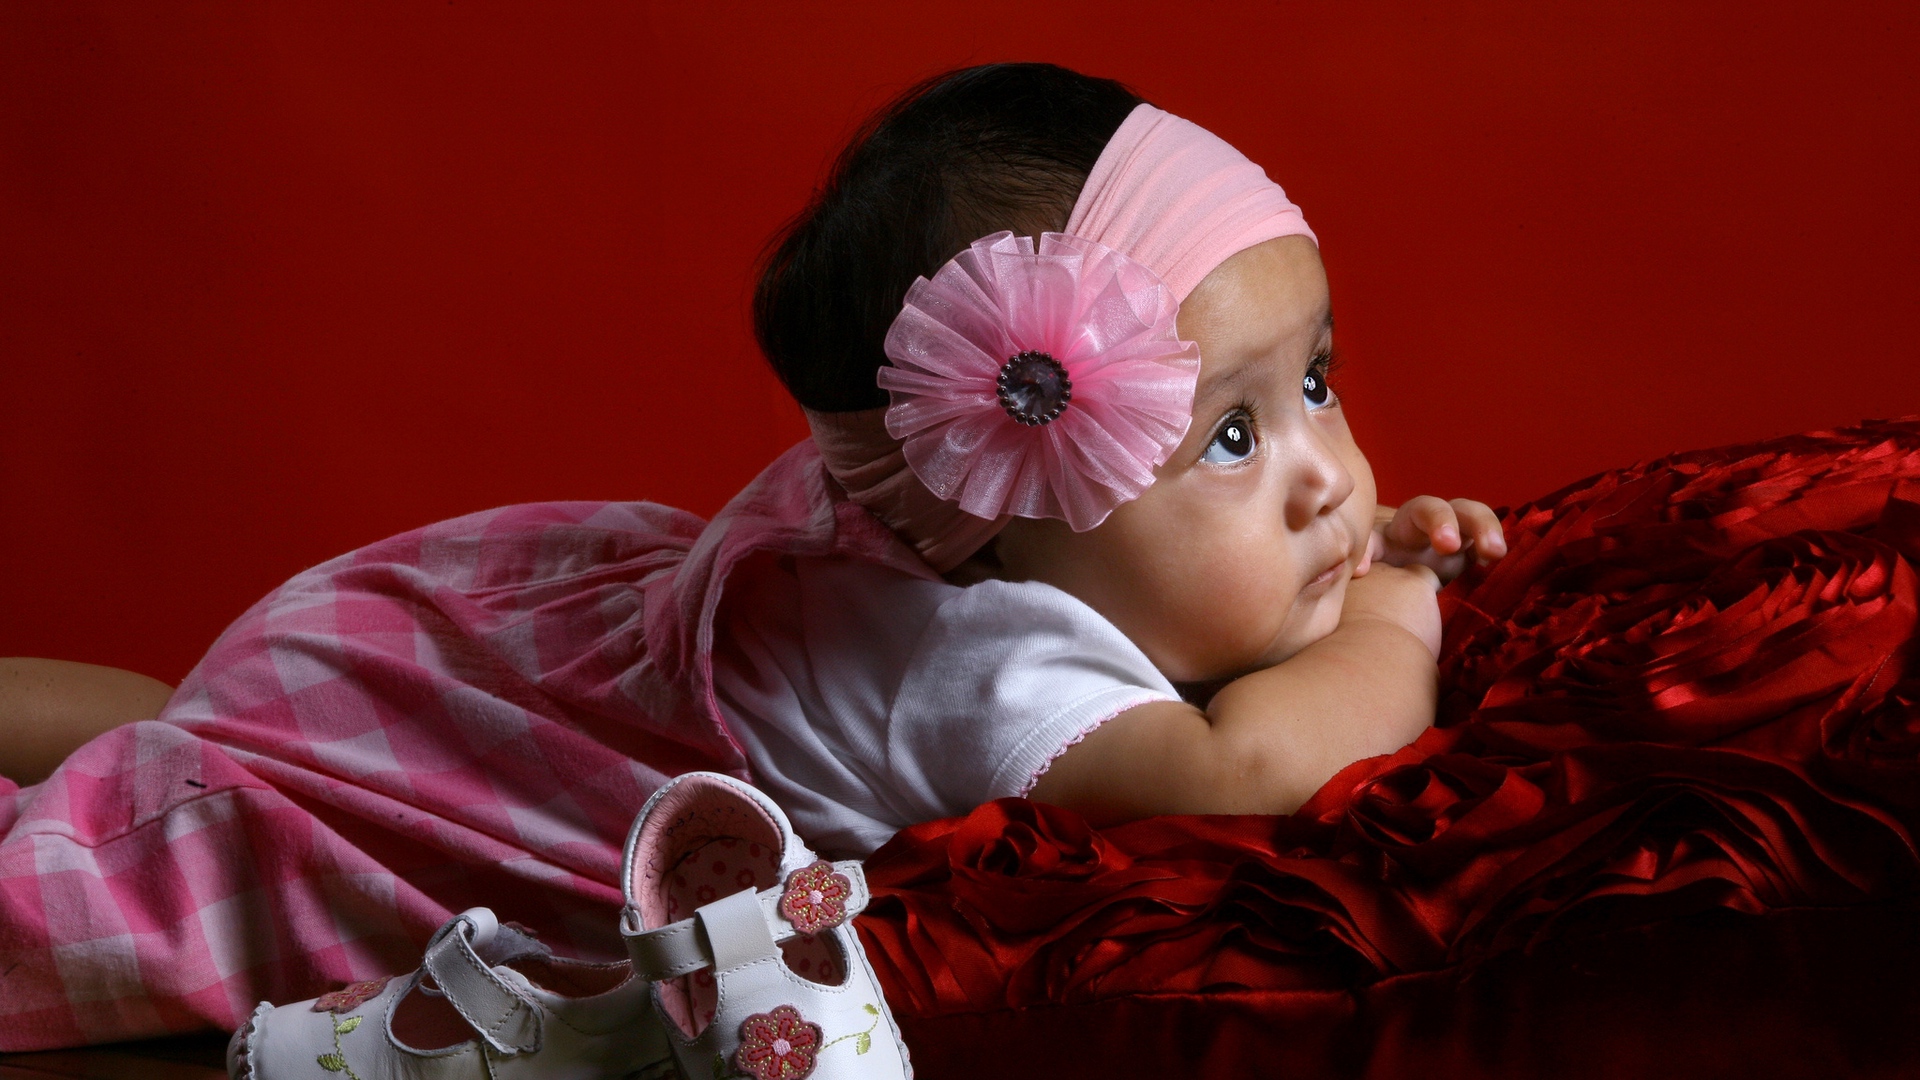 Wallpaper Girl, Shoes, Bandage, Bow Cushion, Baby - Baby Pics For Waiting , HD Wallpaper & Backgrounds